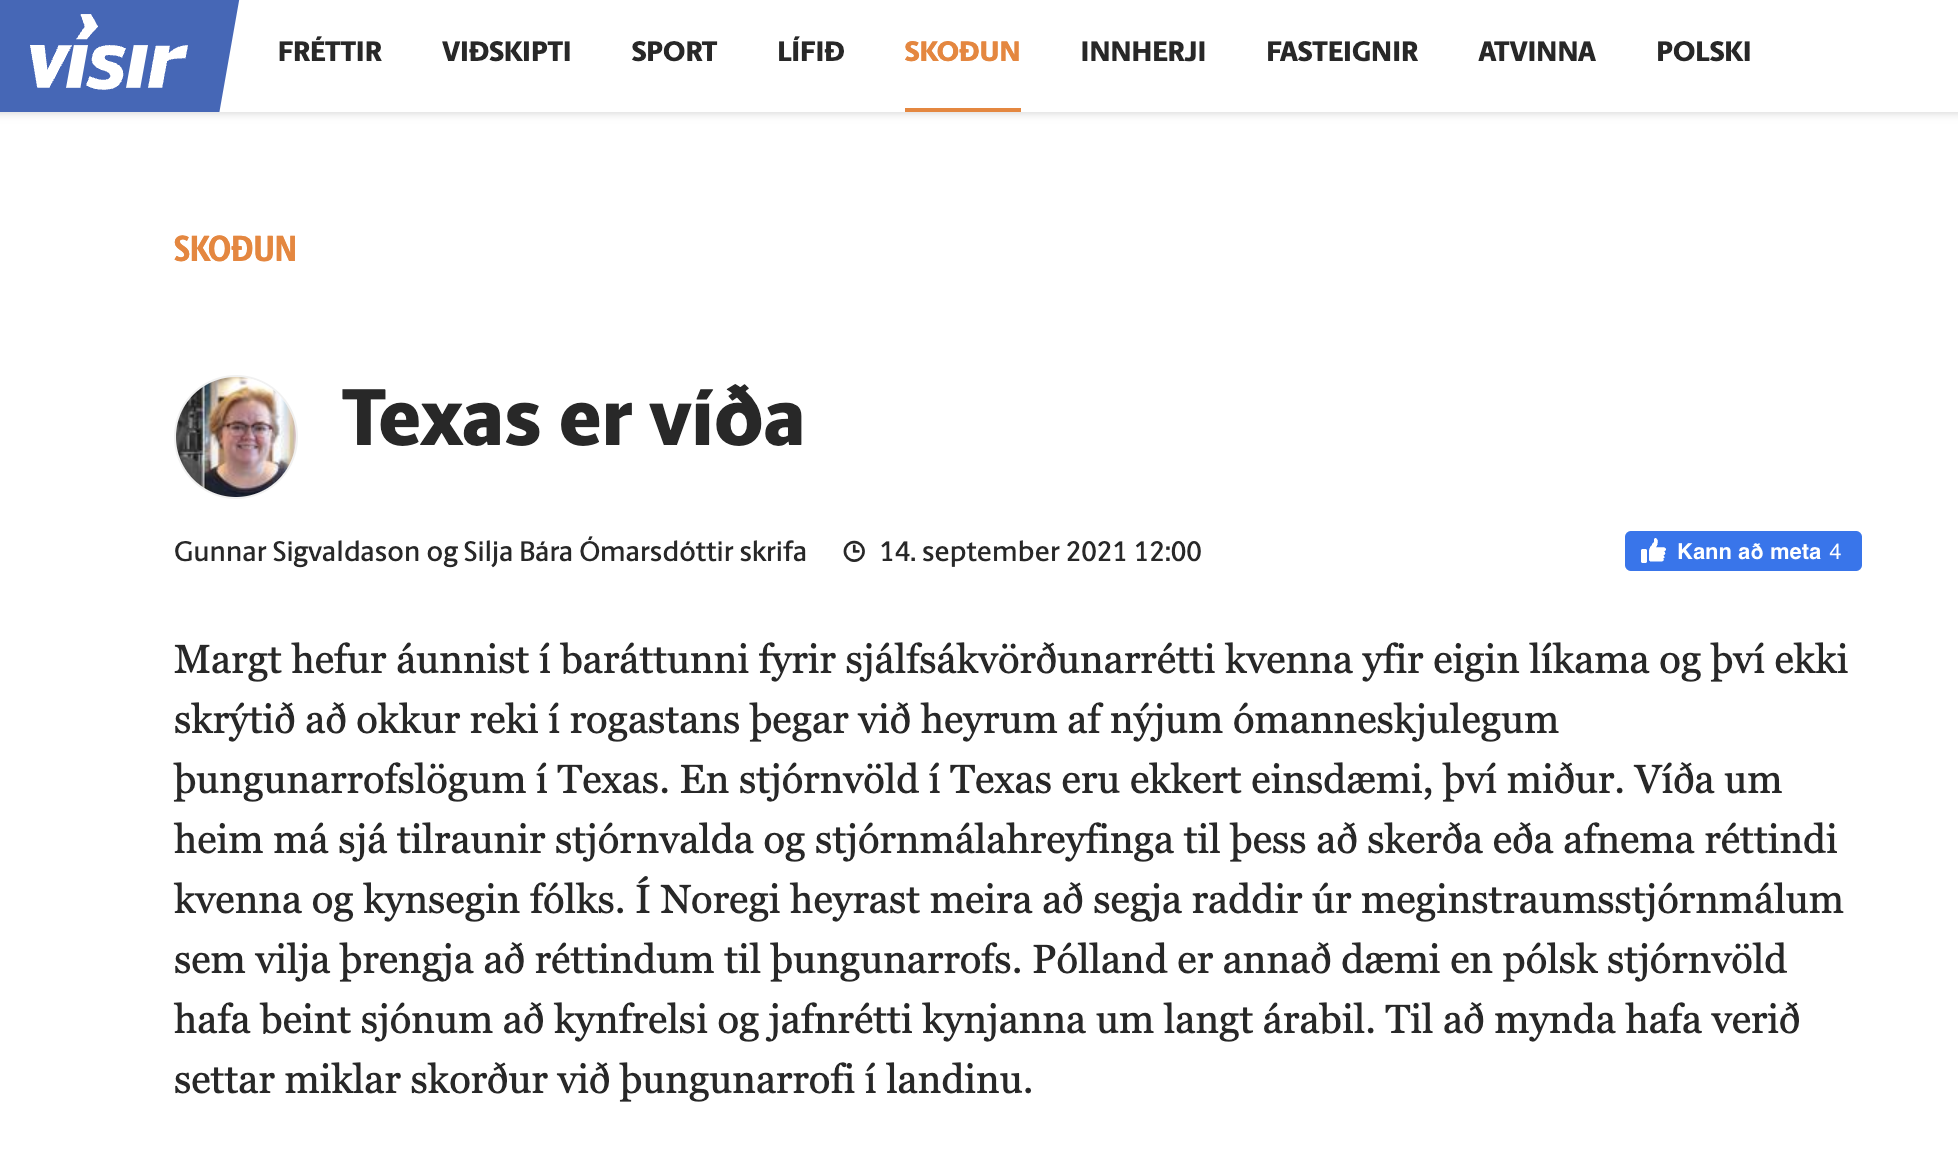 A screenshot of the op-ed on the global resistance to reproductive rights from visir.is, an Icelandic online newspaper